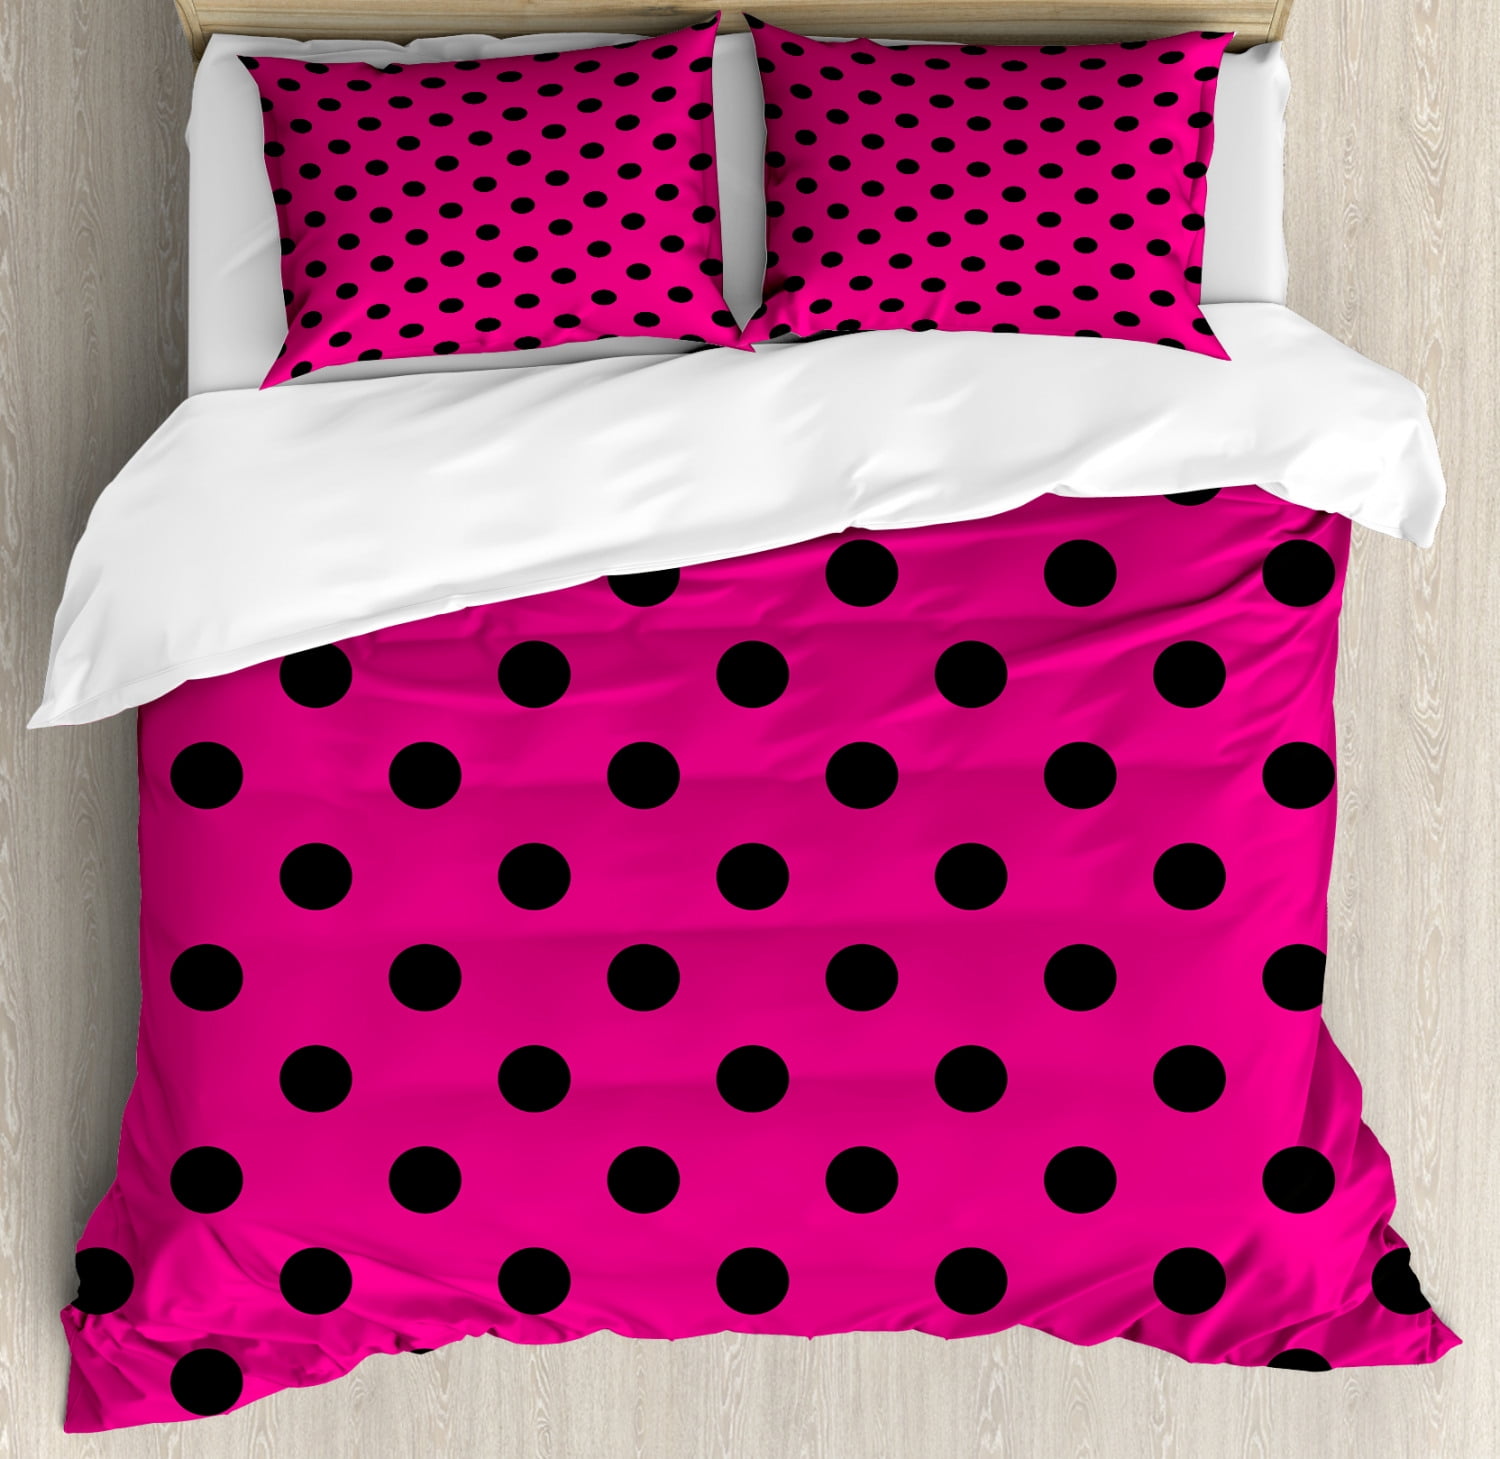 Polka Dots Peach and Black Classic Dot Feminine Decor Pink Print 100% Cotton Sateen 30in x 24in Flange Sham Roostery Pillow Sham